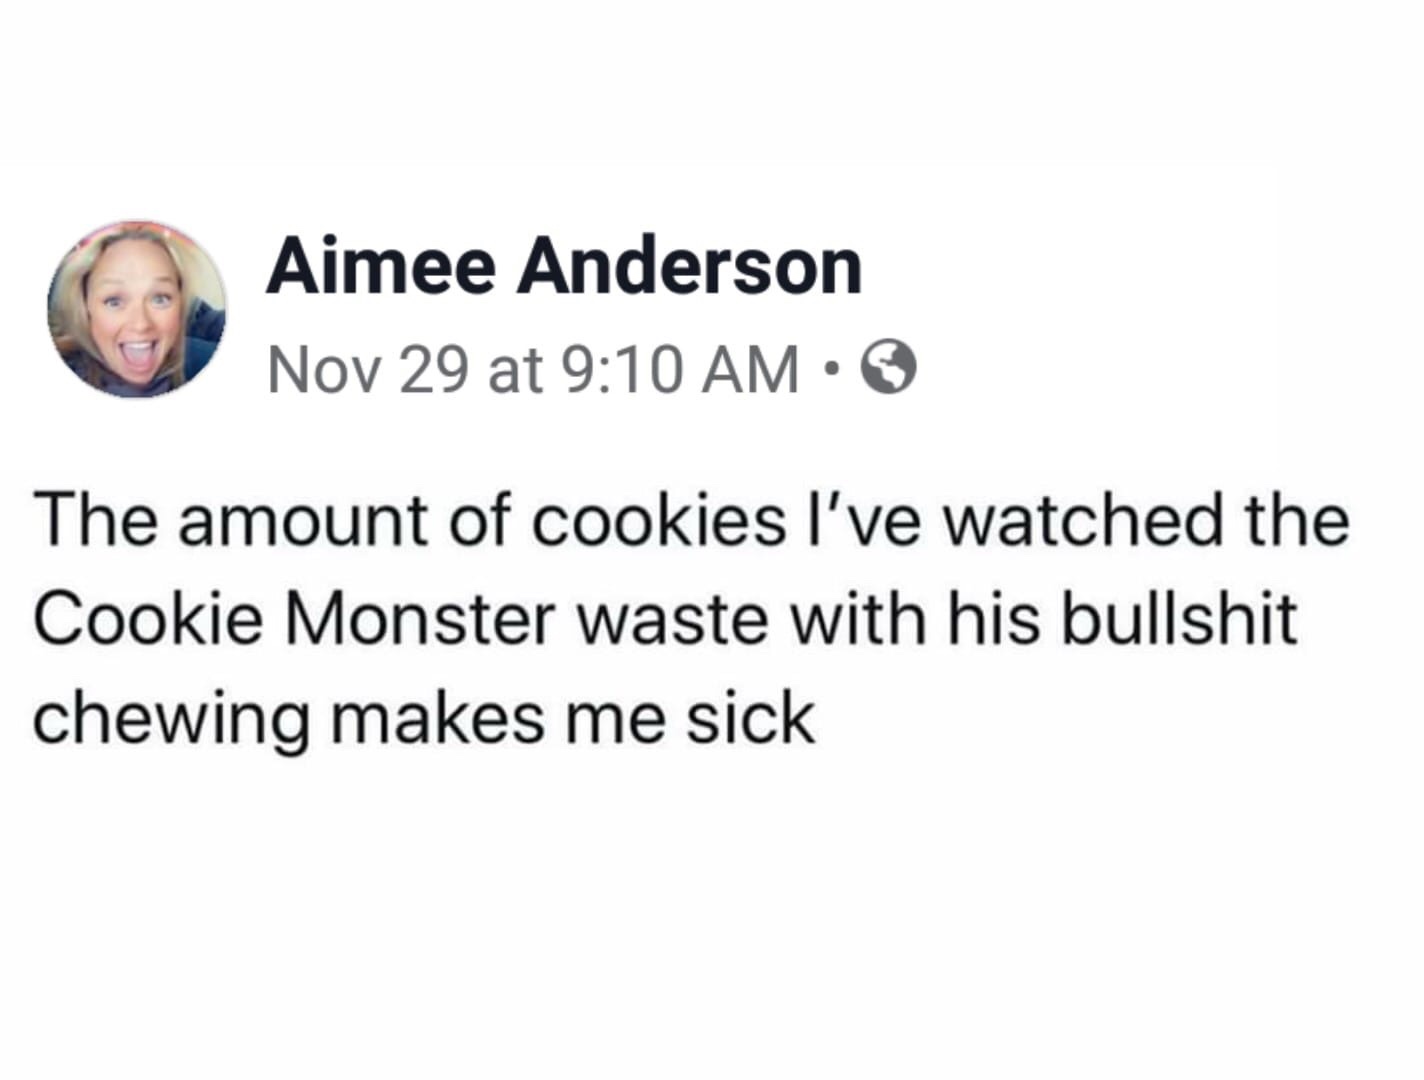 smile - Aimee Anderson Nov 29 at The amount of cookies I've watched the Cookie Monster waste with his bullshit chewing makes me sick